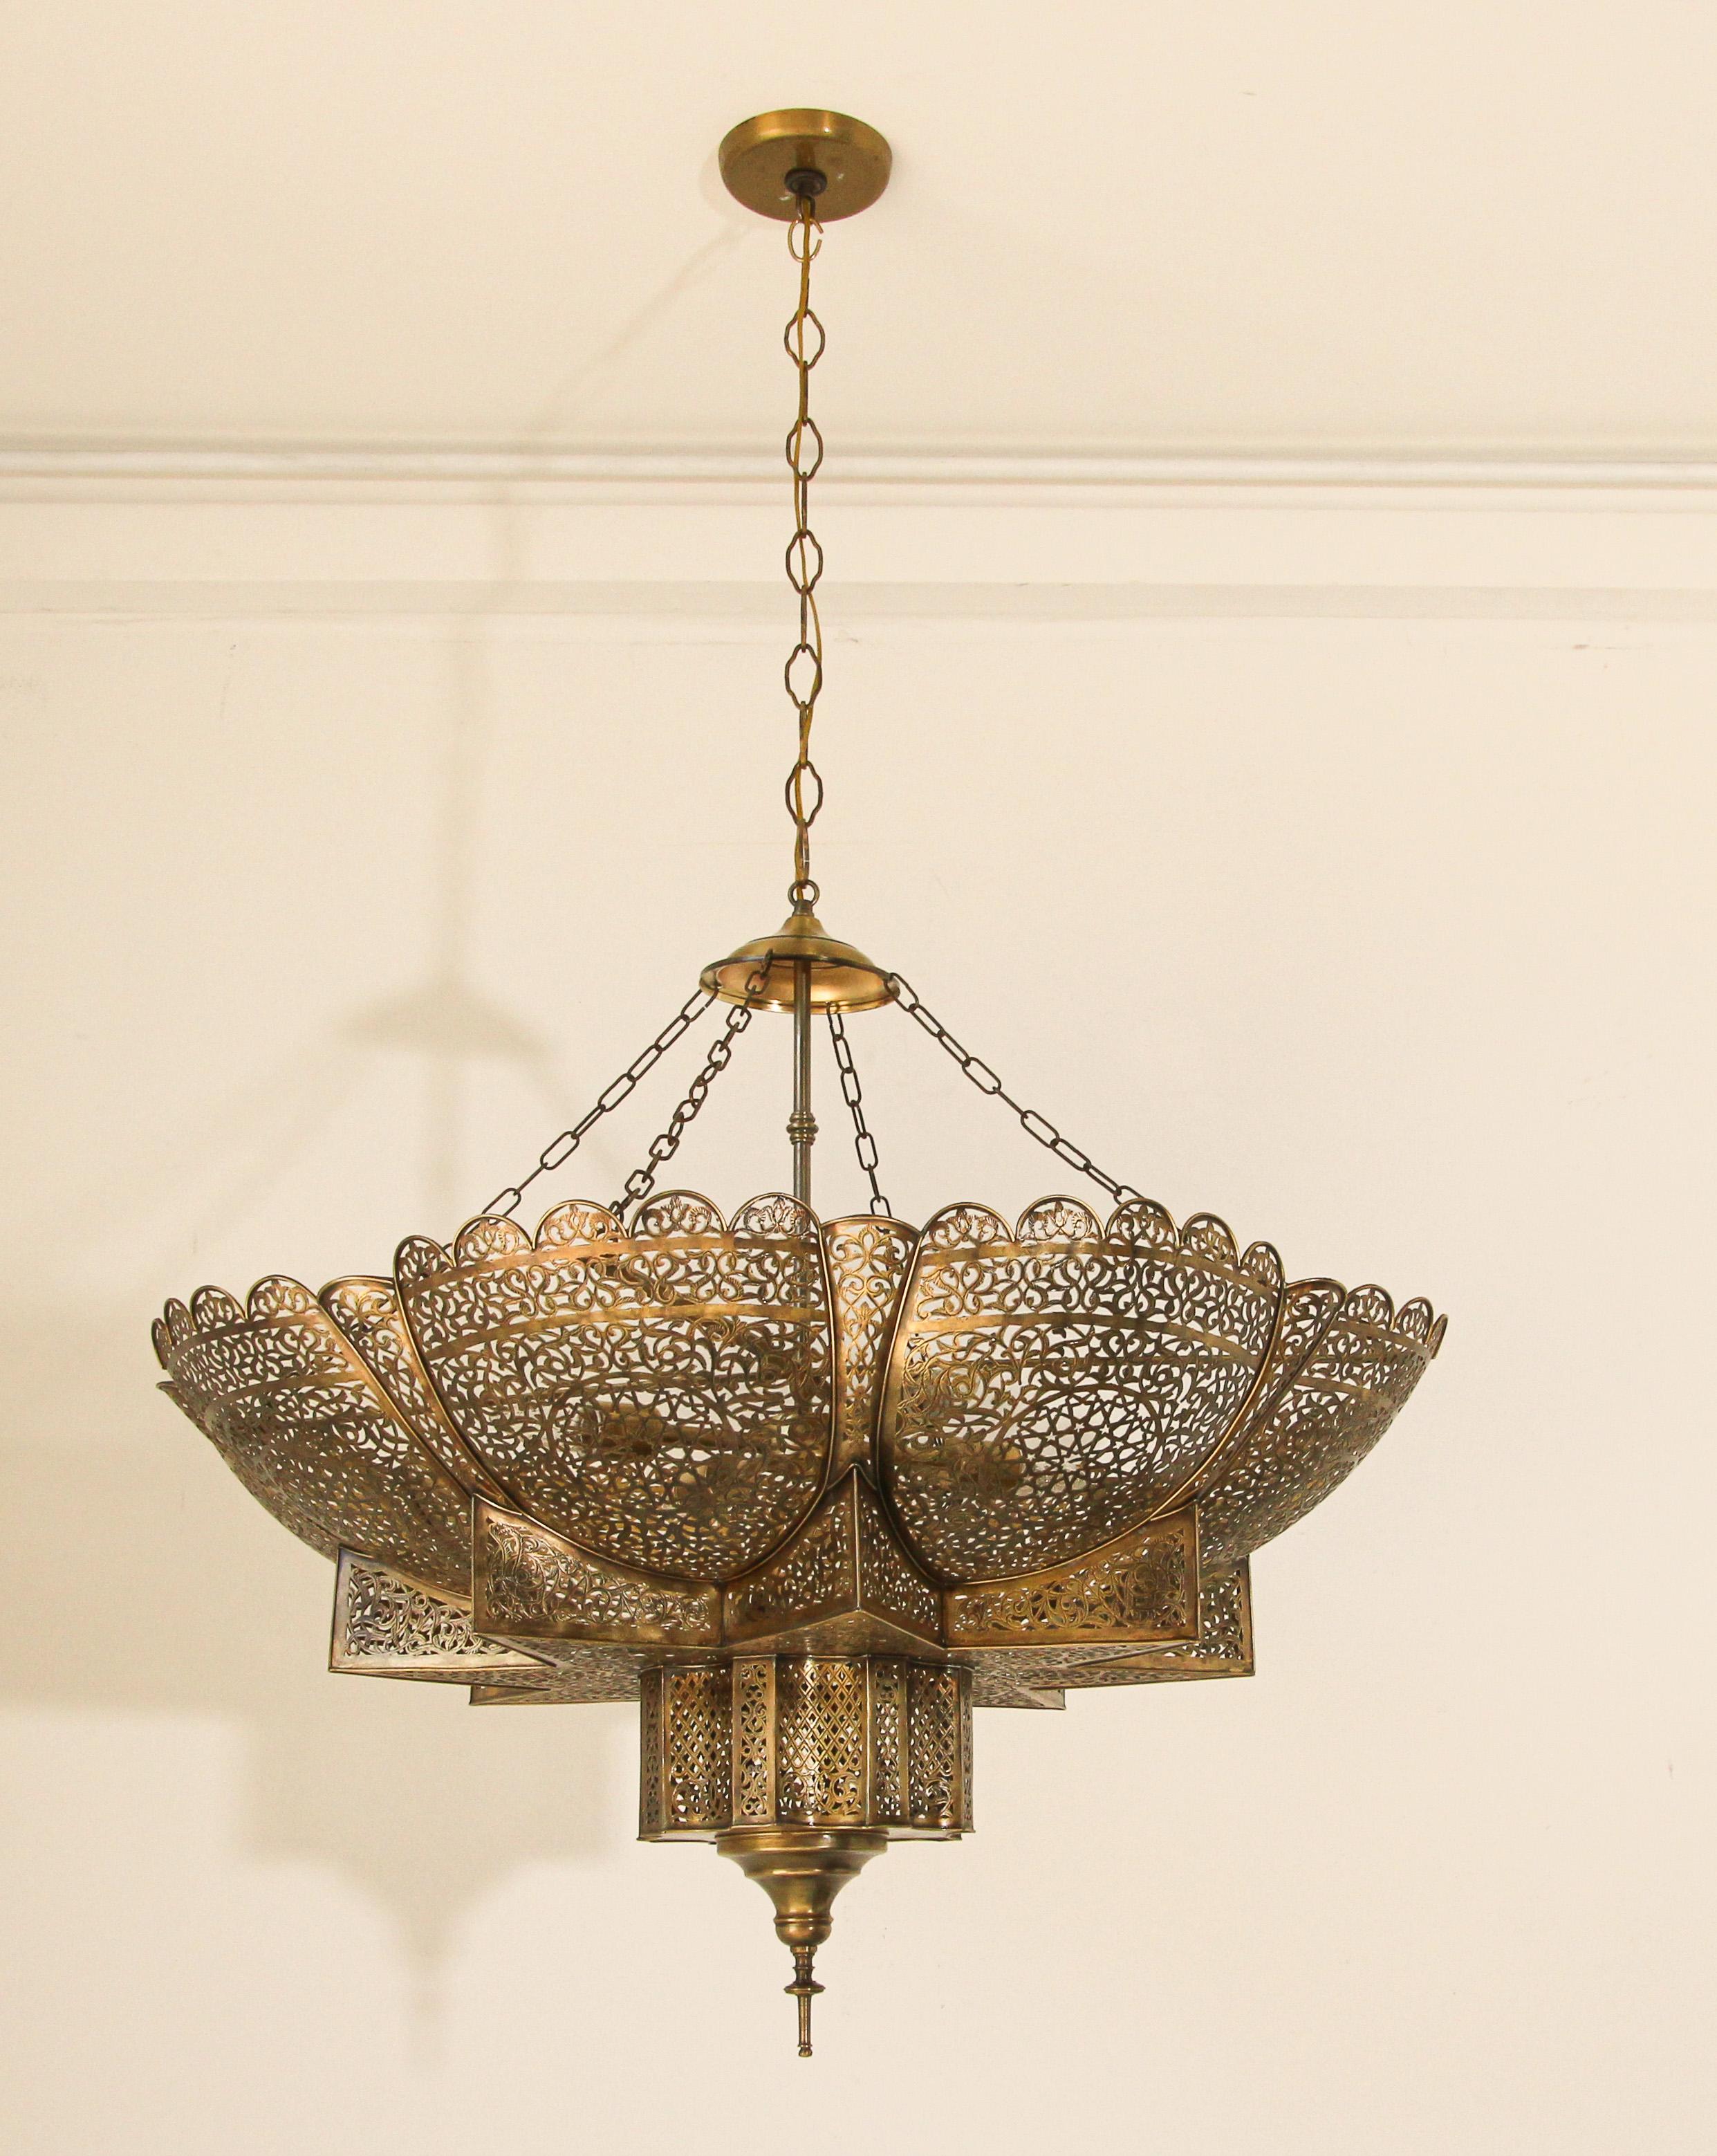 Moroccan Moorish Brass Alhambra Chandelier
Handcrafted Moroccan Moorish brass filigree chandelier.
This Harem Moroccan chandelier is made of brass and delicately handcrafted, hand-chase, hand-hammered and chiseled, the brass become a fine art